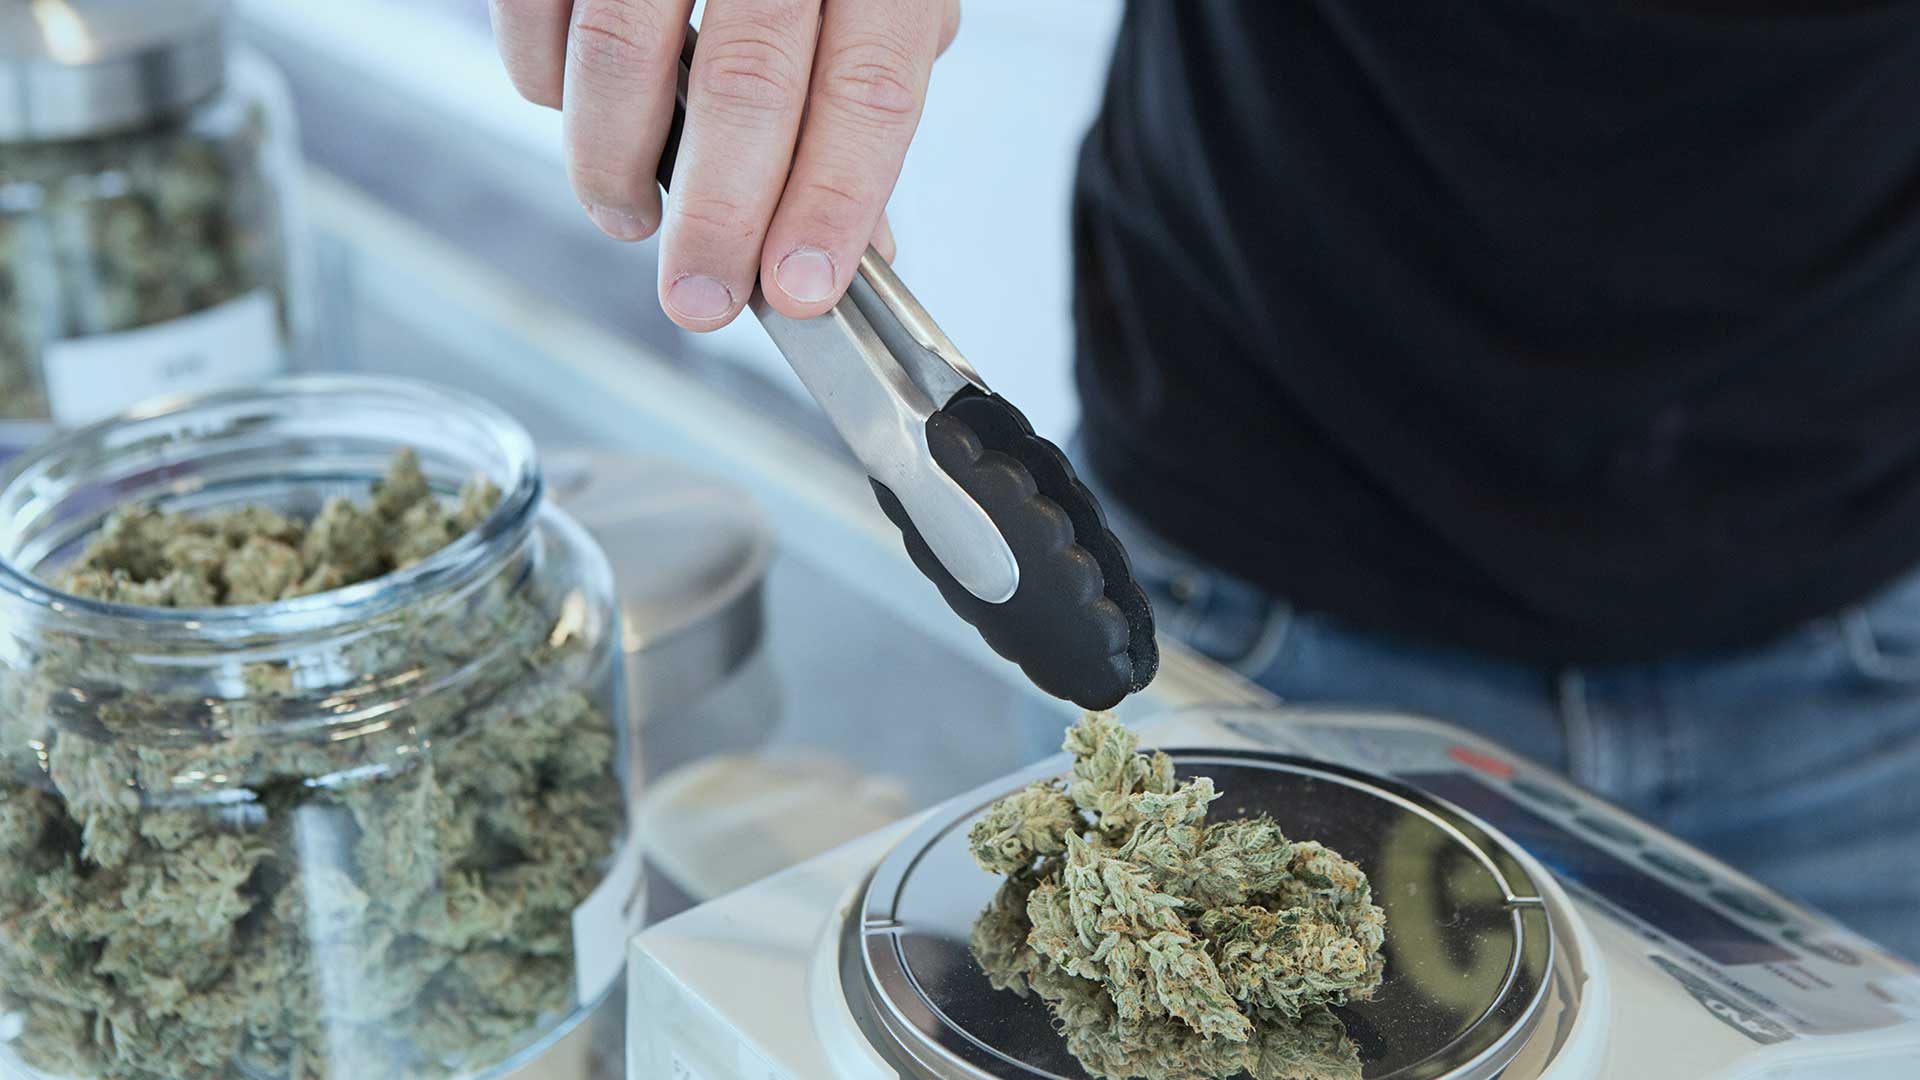 A hand holds small tongs to handle cannabis flower.